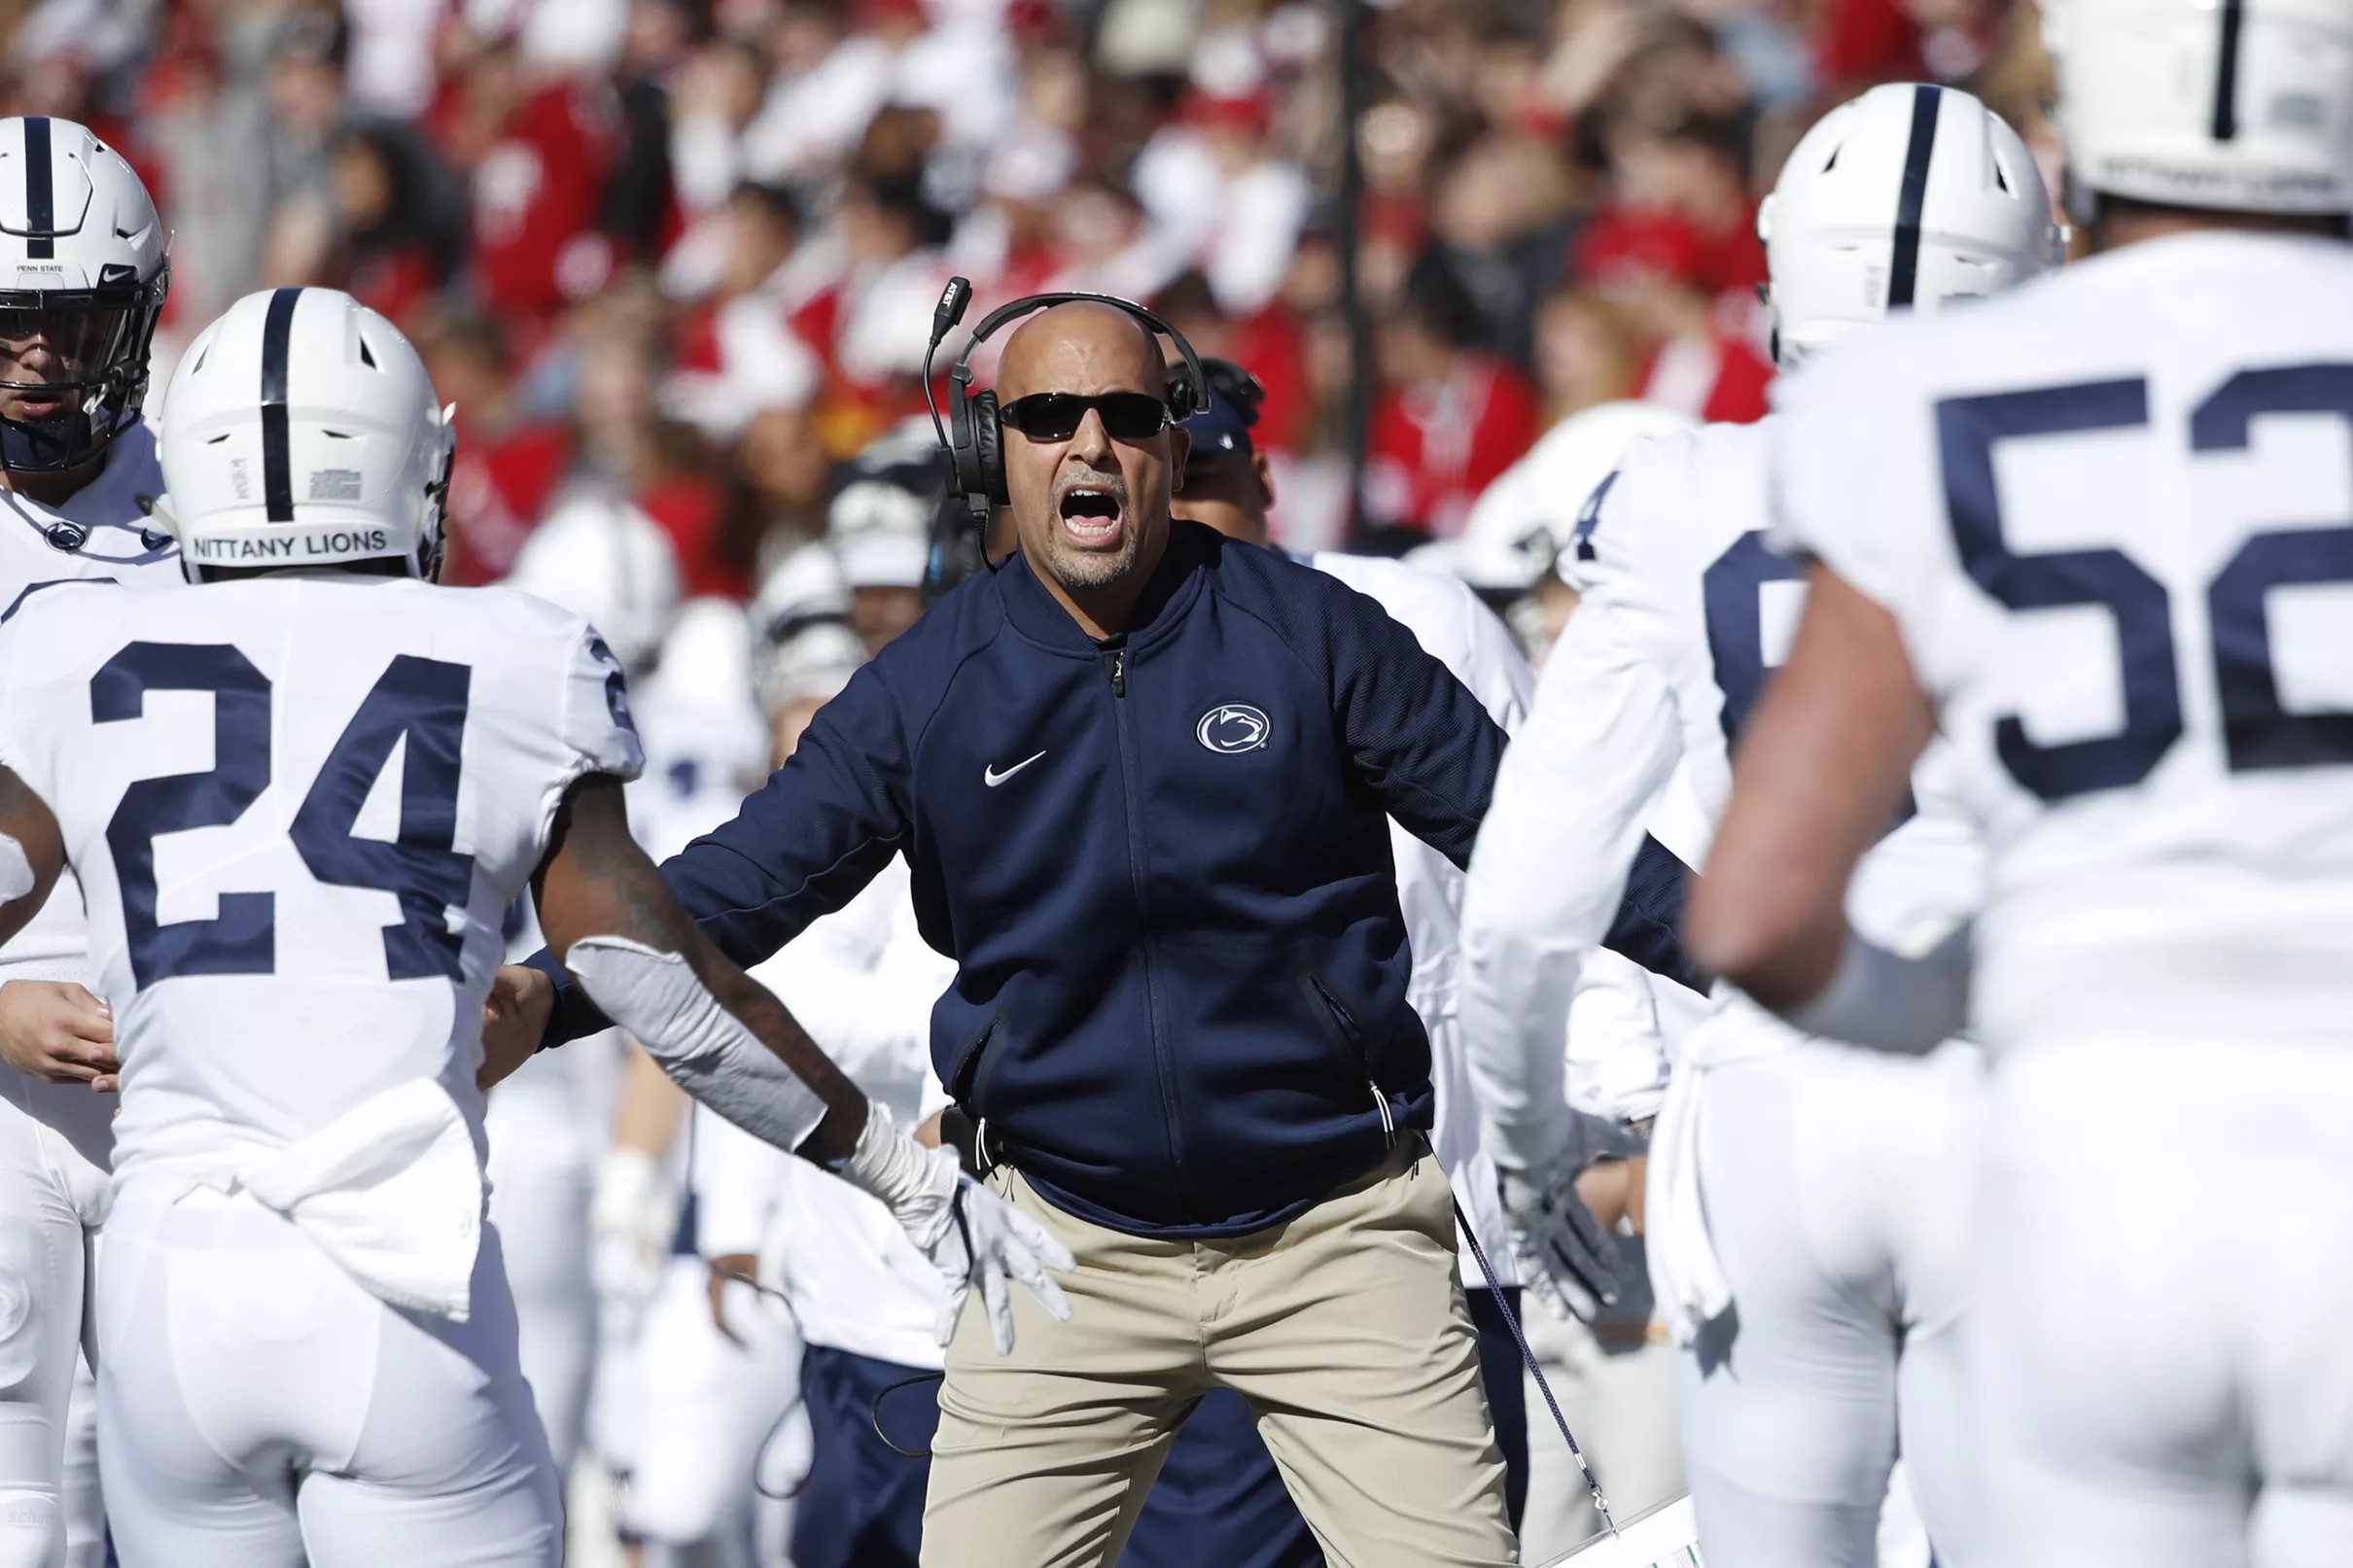 James Franklin says Michigan DB’s hold and grab